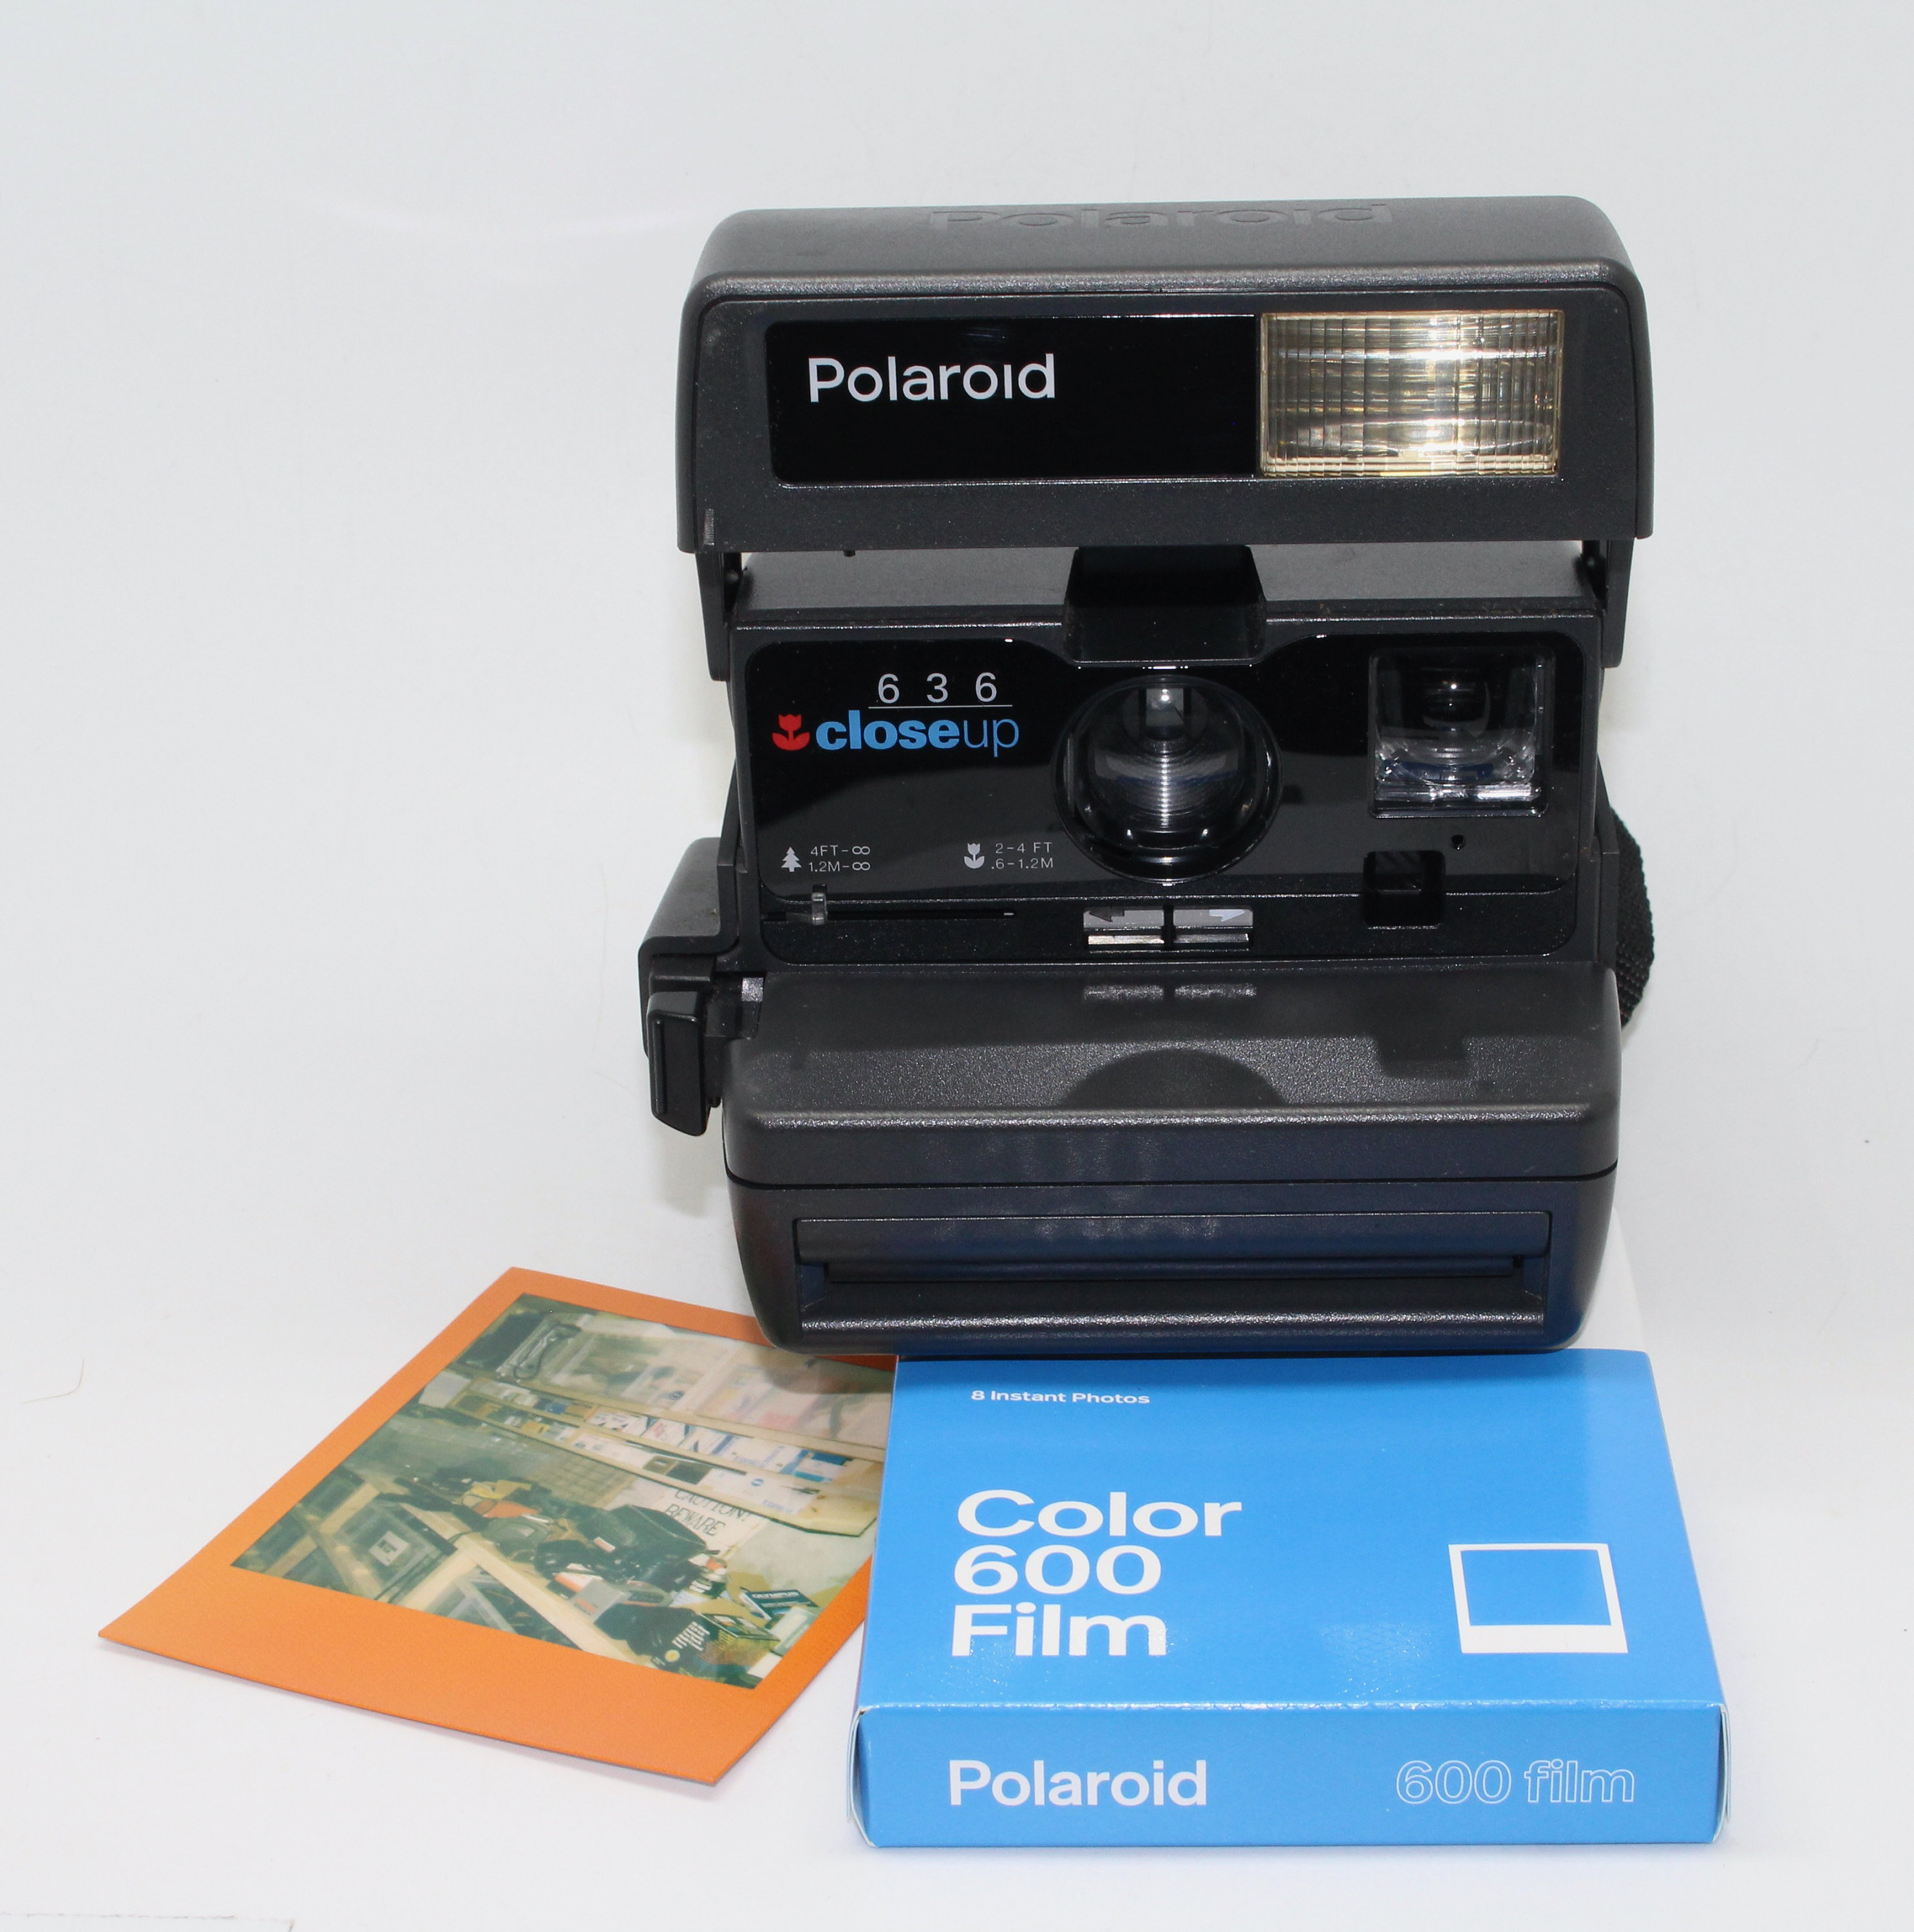 Polaroid 636 Close up Instant Camera With a Brand-new 600 Film